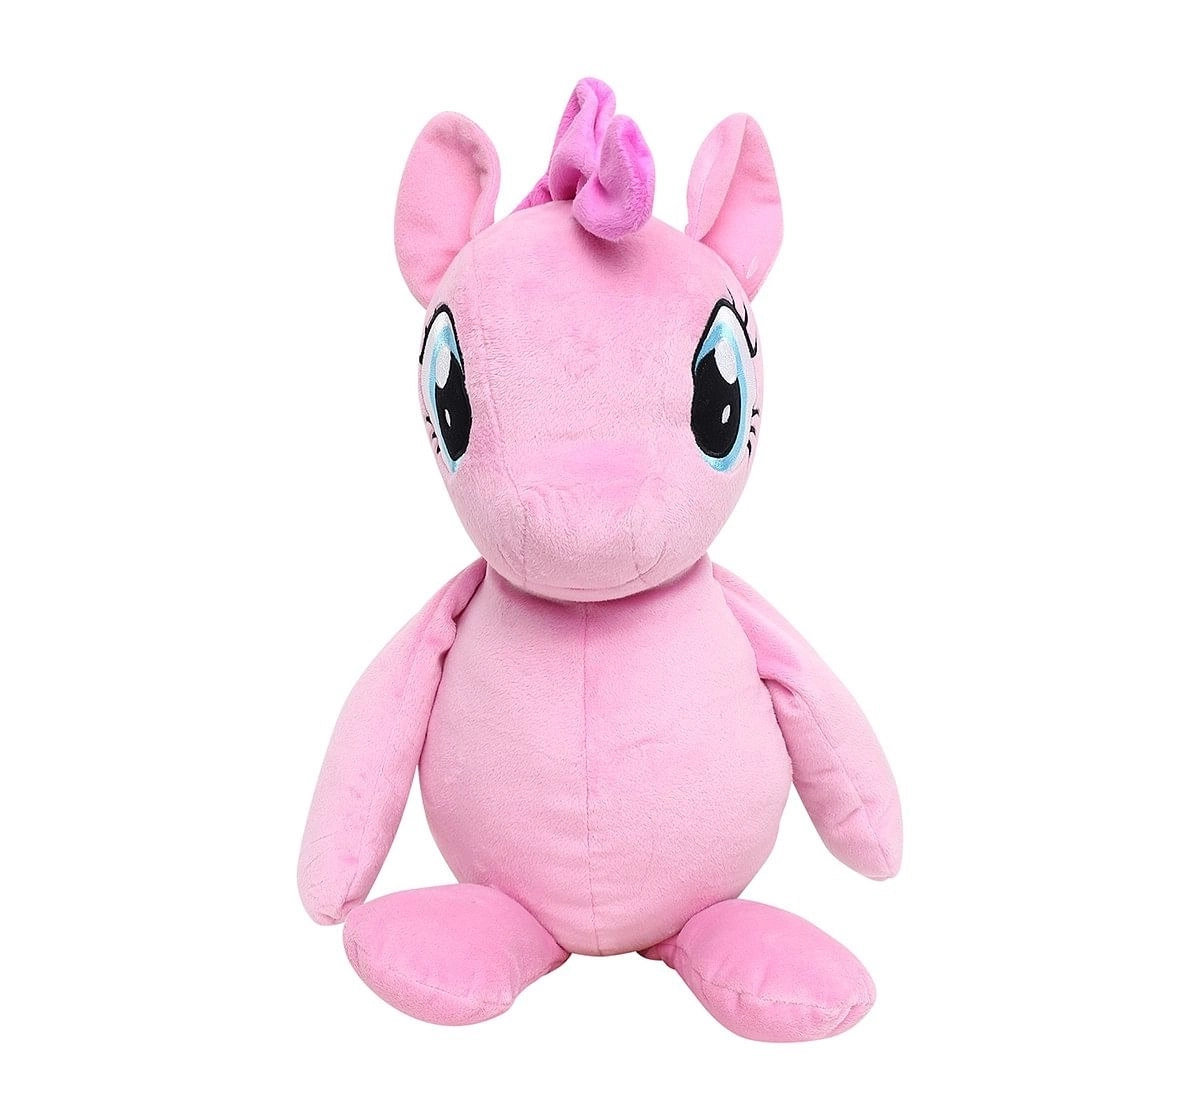  My Little Pony Friendship Is Magic Pinkie Pie Huggable Plush Character Soft Toys for Kids age 3Y+ - 30.5 Cm (Pink)